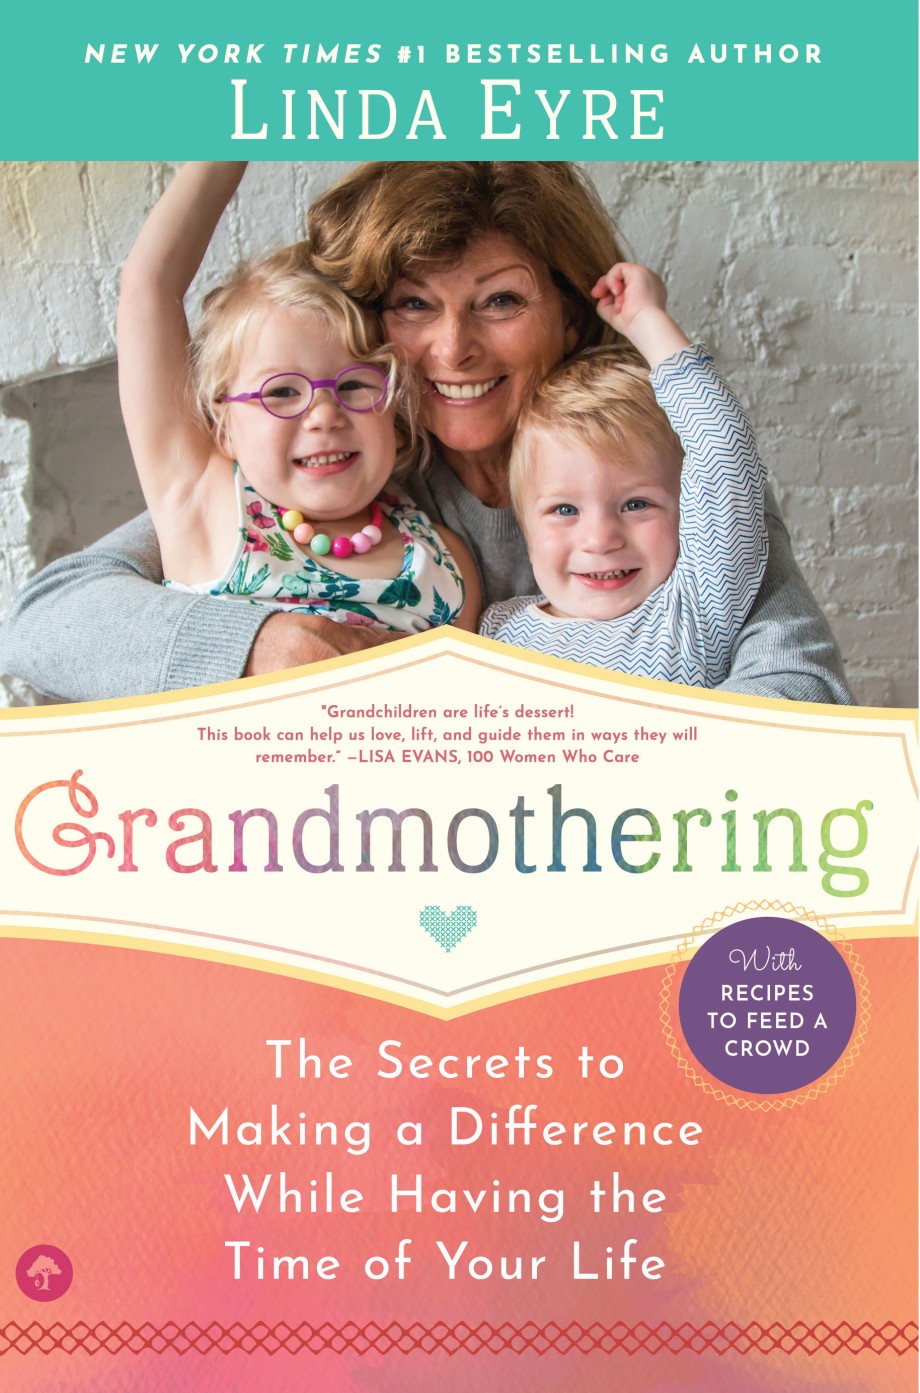 Grandmothering The Secrets to Making a Difference While Having the Time of Your Life